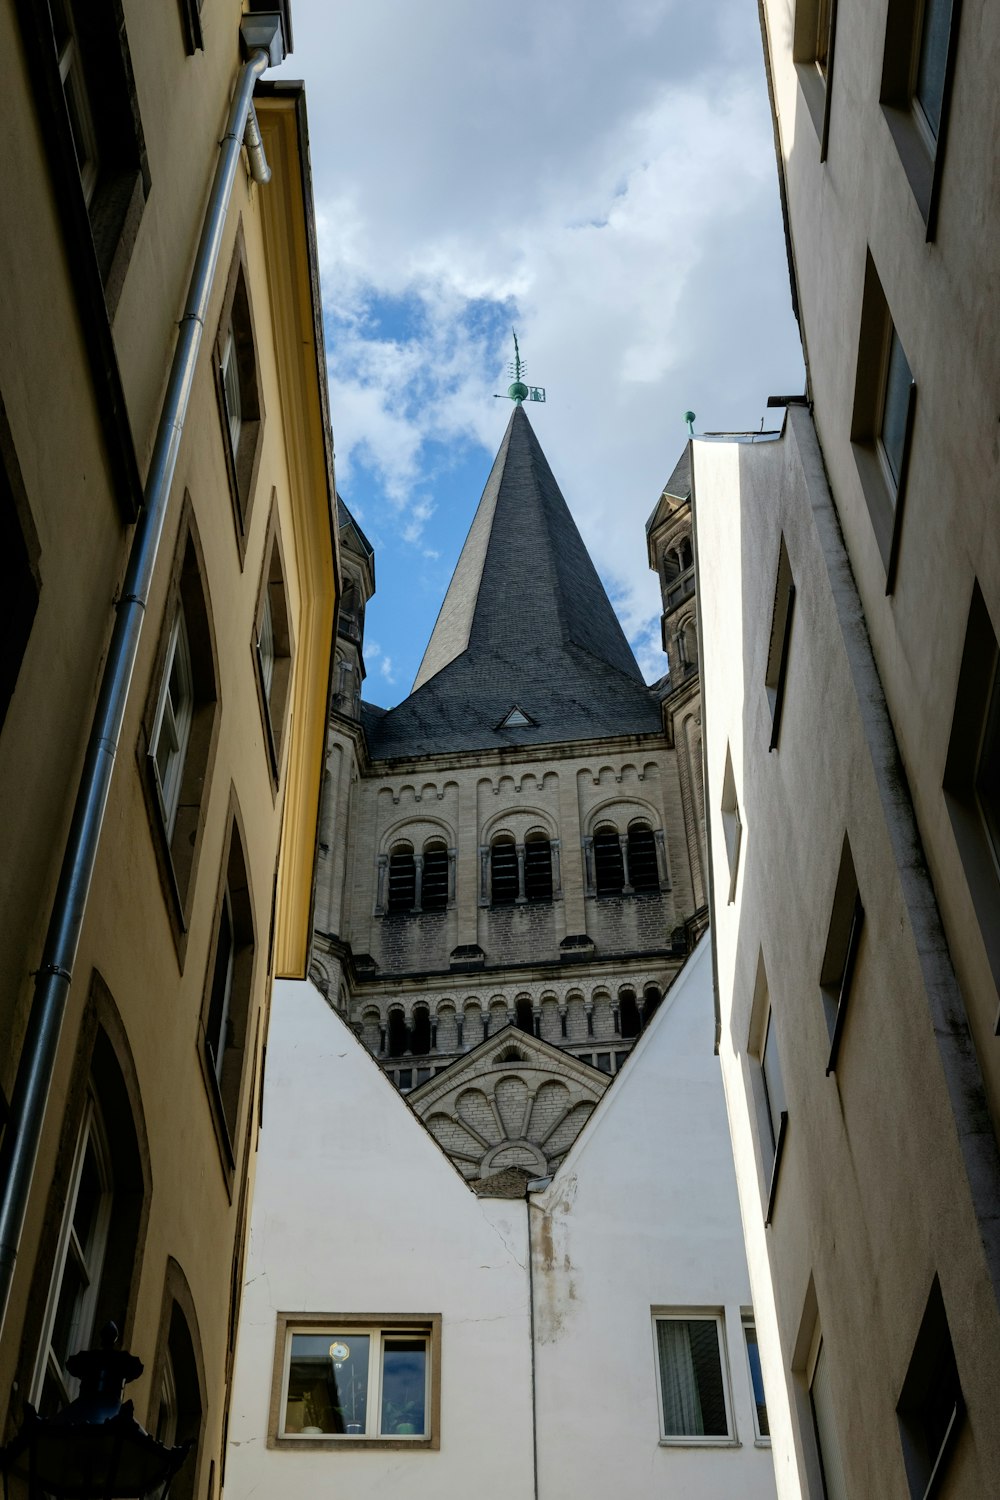 looking up at a tall building with a steeple